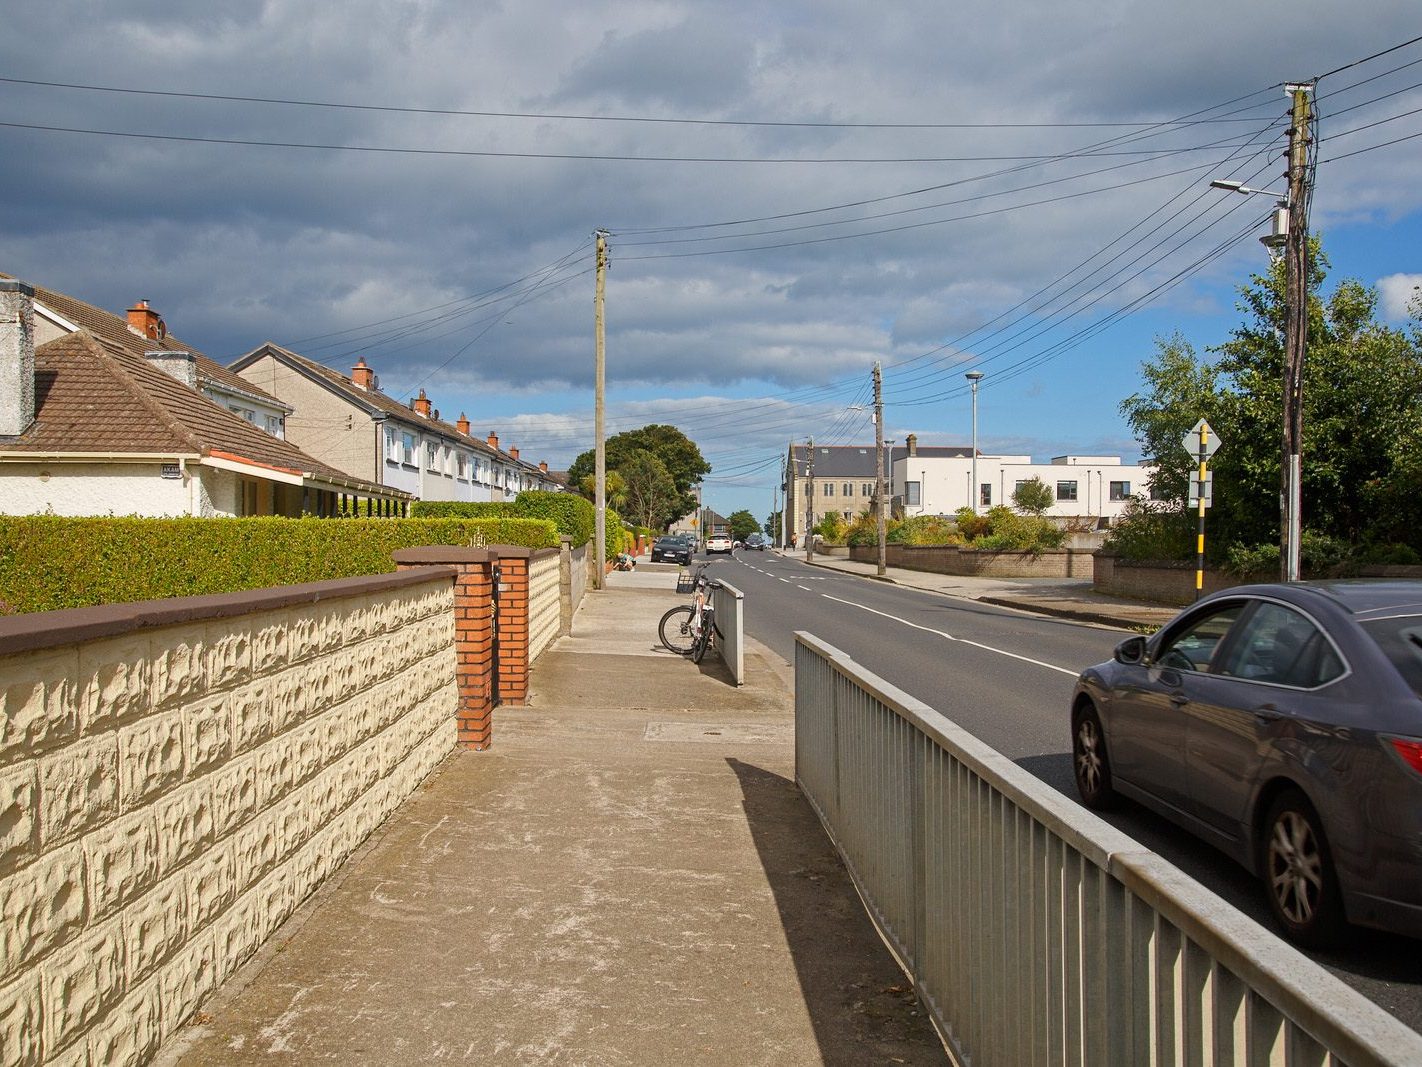 DUBLIN STREET IN BALDOYLE [HOME TO ST MARY'S SCHOOL AND ST PATRICK'S CARE CENTRE] 013